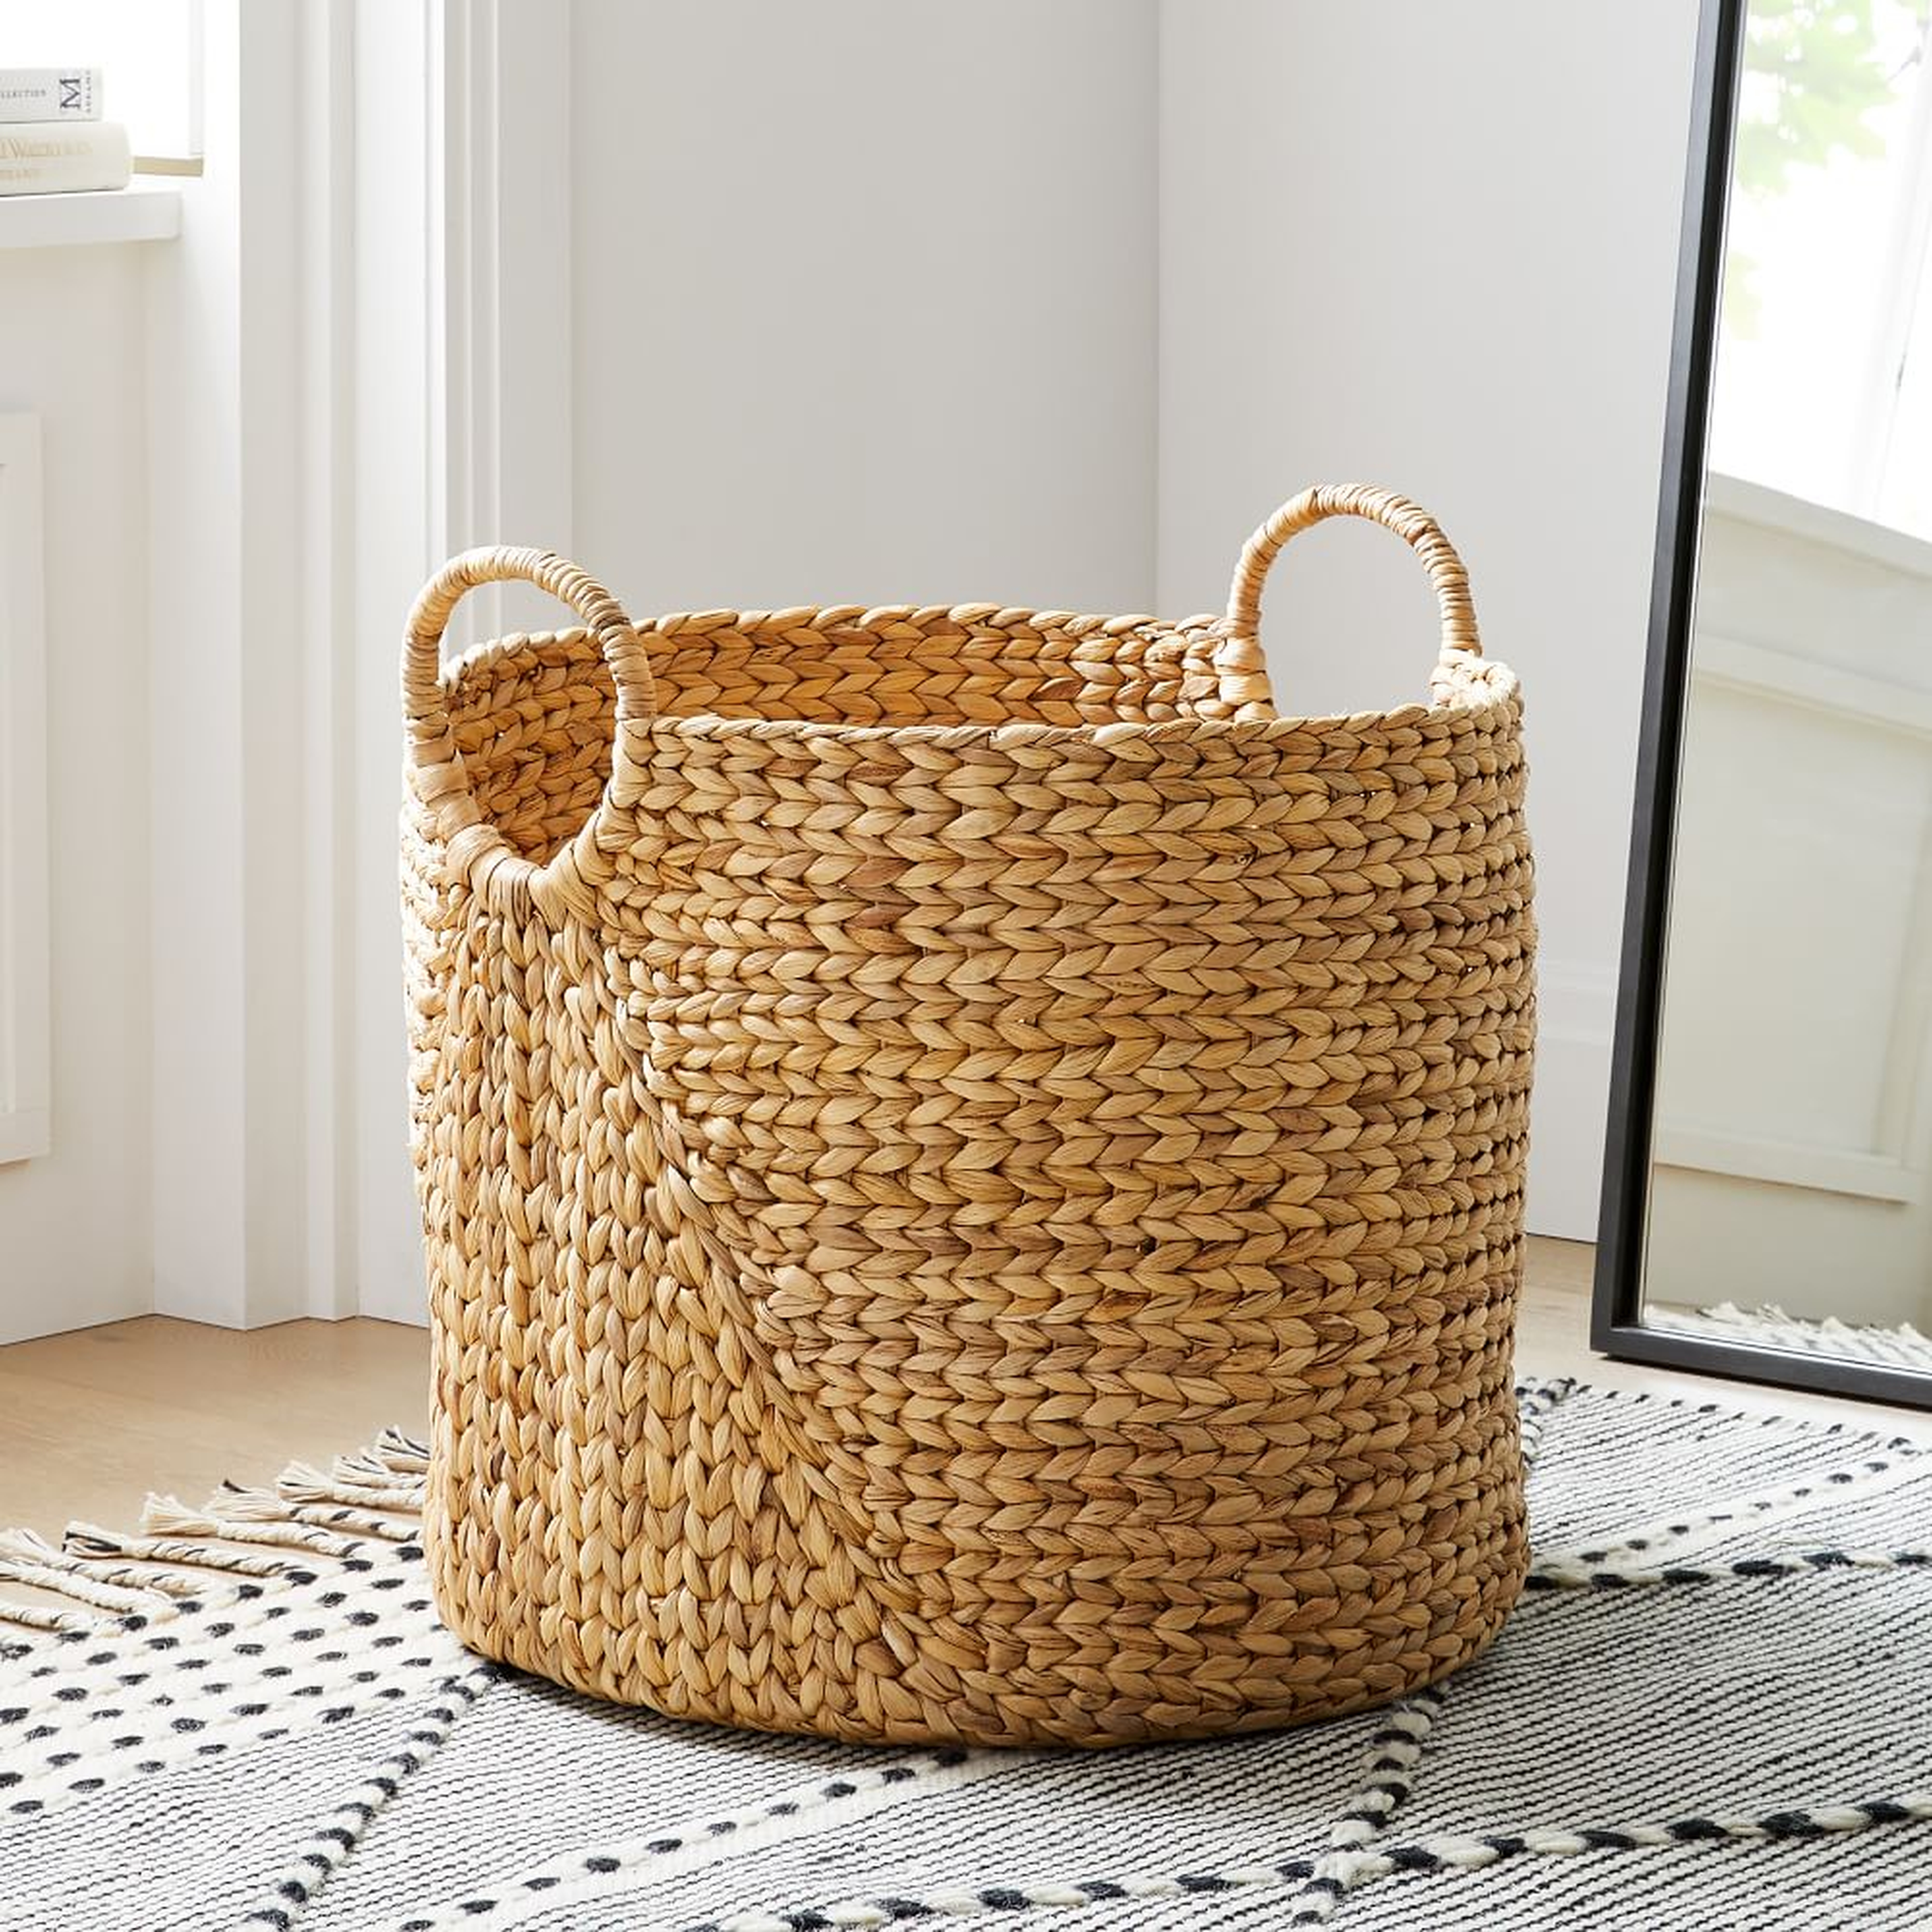 Curved Seagrass Basket, Round Handle Baskets, Natural, Large, 19.3"D x 19.7"H - West Elm